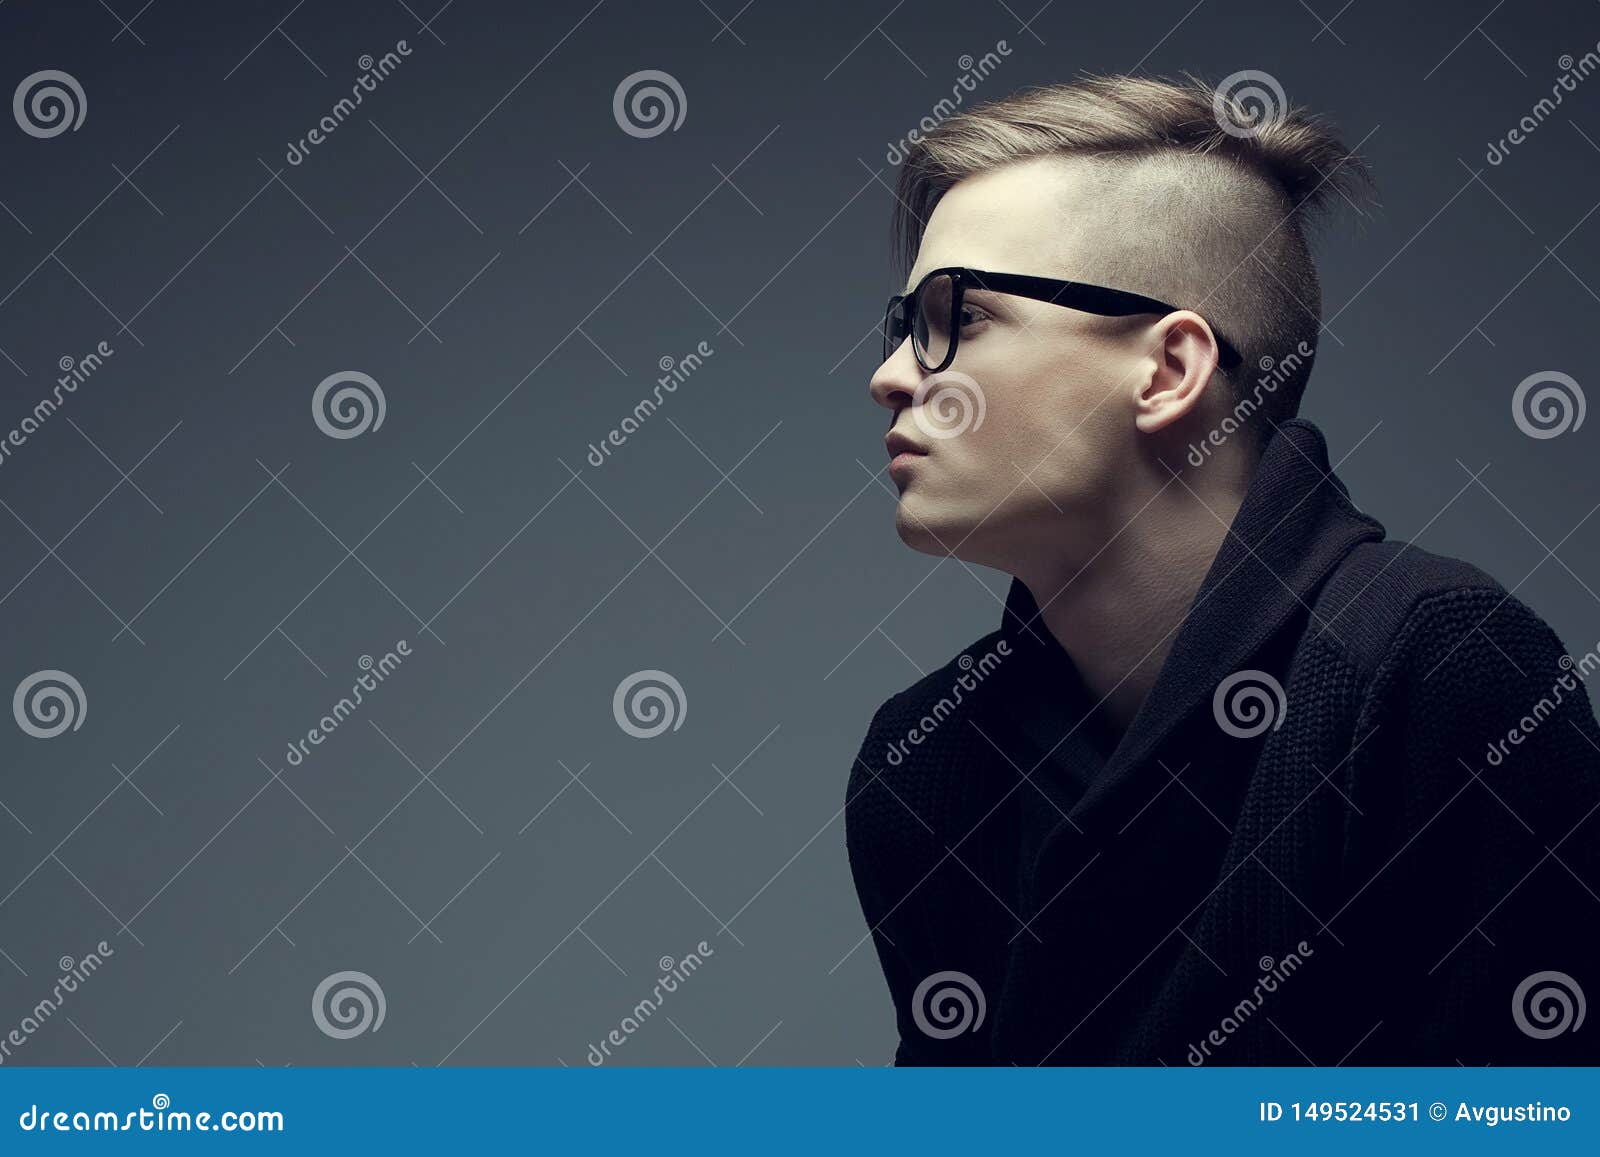 Male Beauty Concept. Portrait of a Fashionable Young Man with Stylish  Haircut Wearing Trendy Glasses and Sweater & Posing Over Stock Image -  Image of care, confident: 149524531